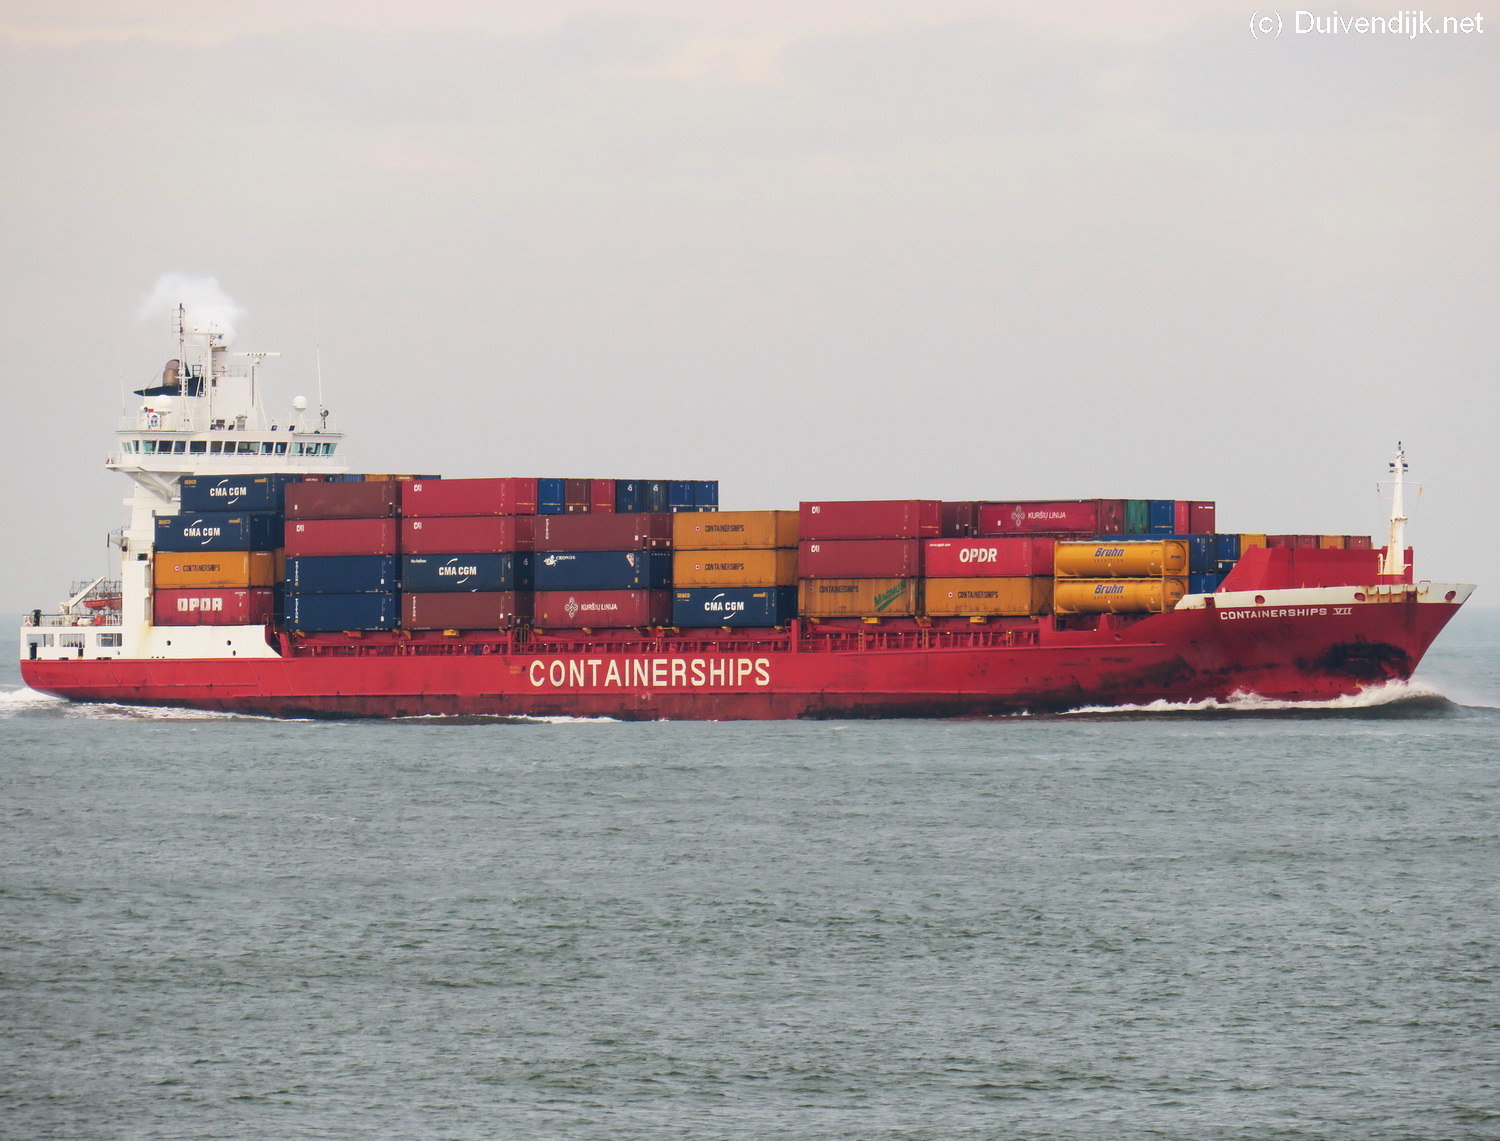 Containerships VII